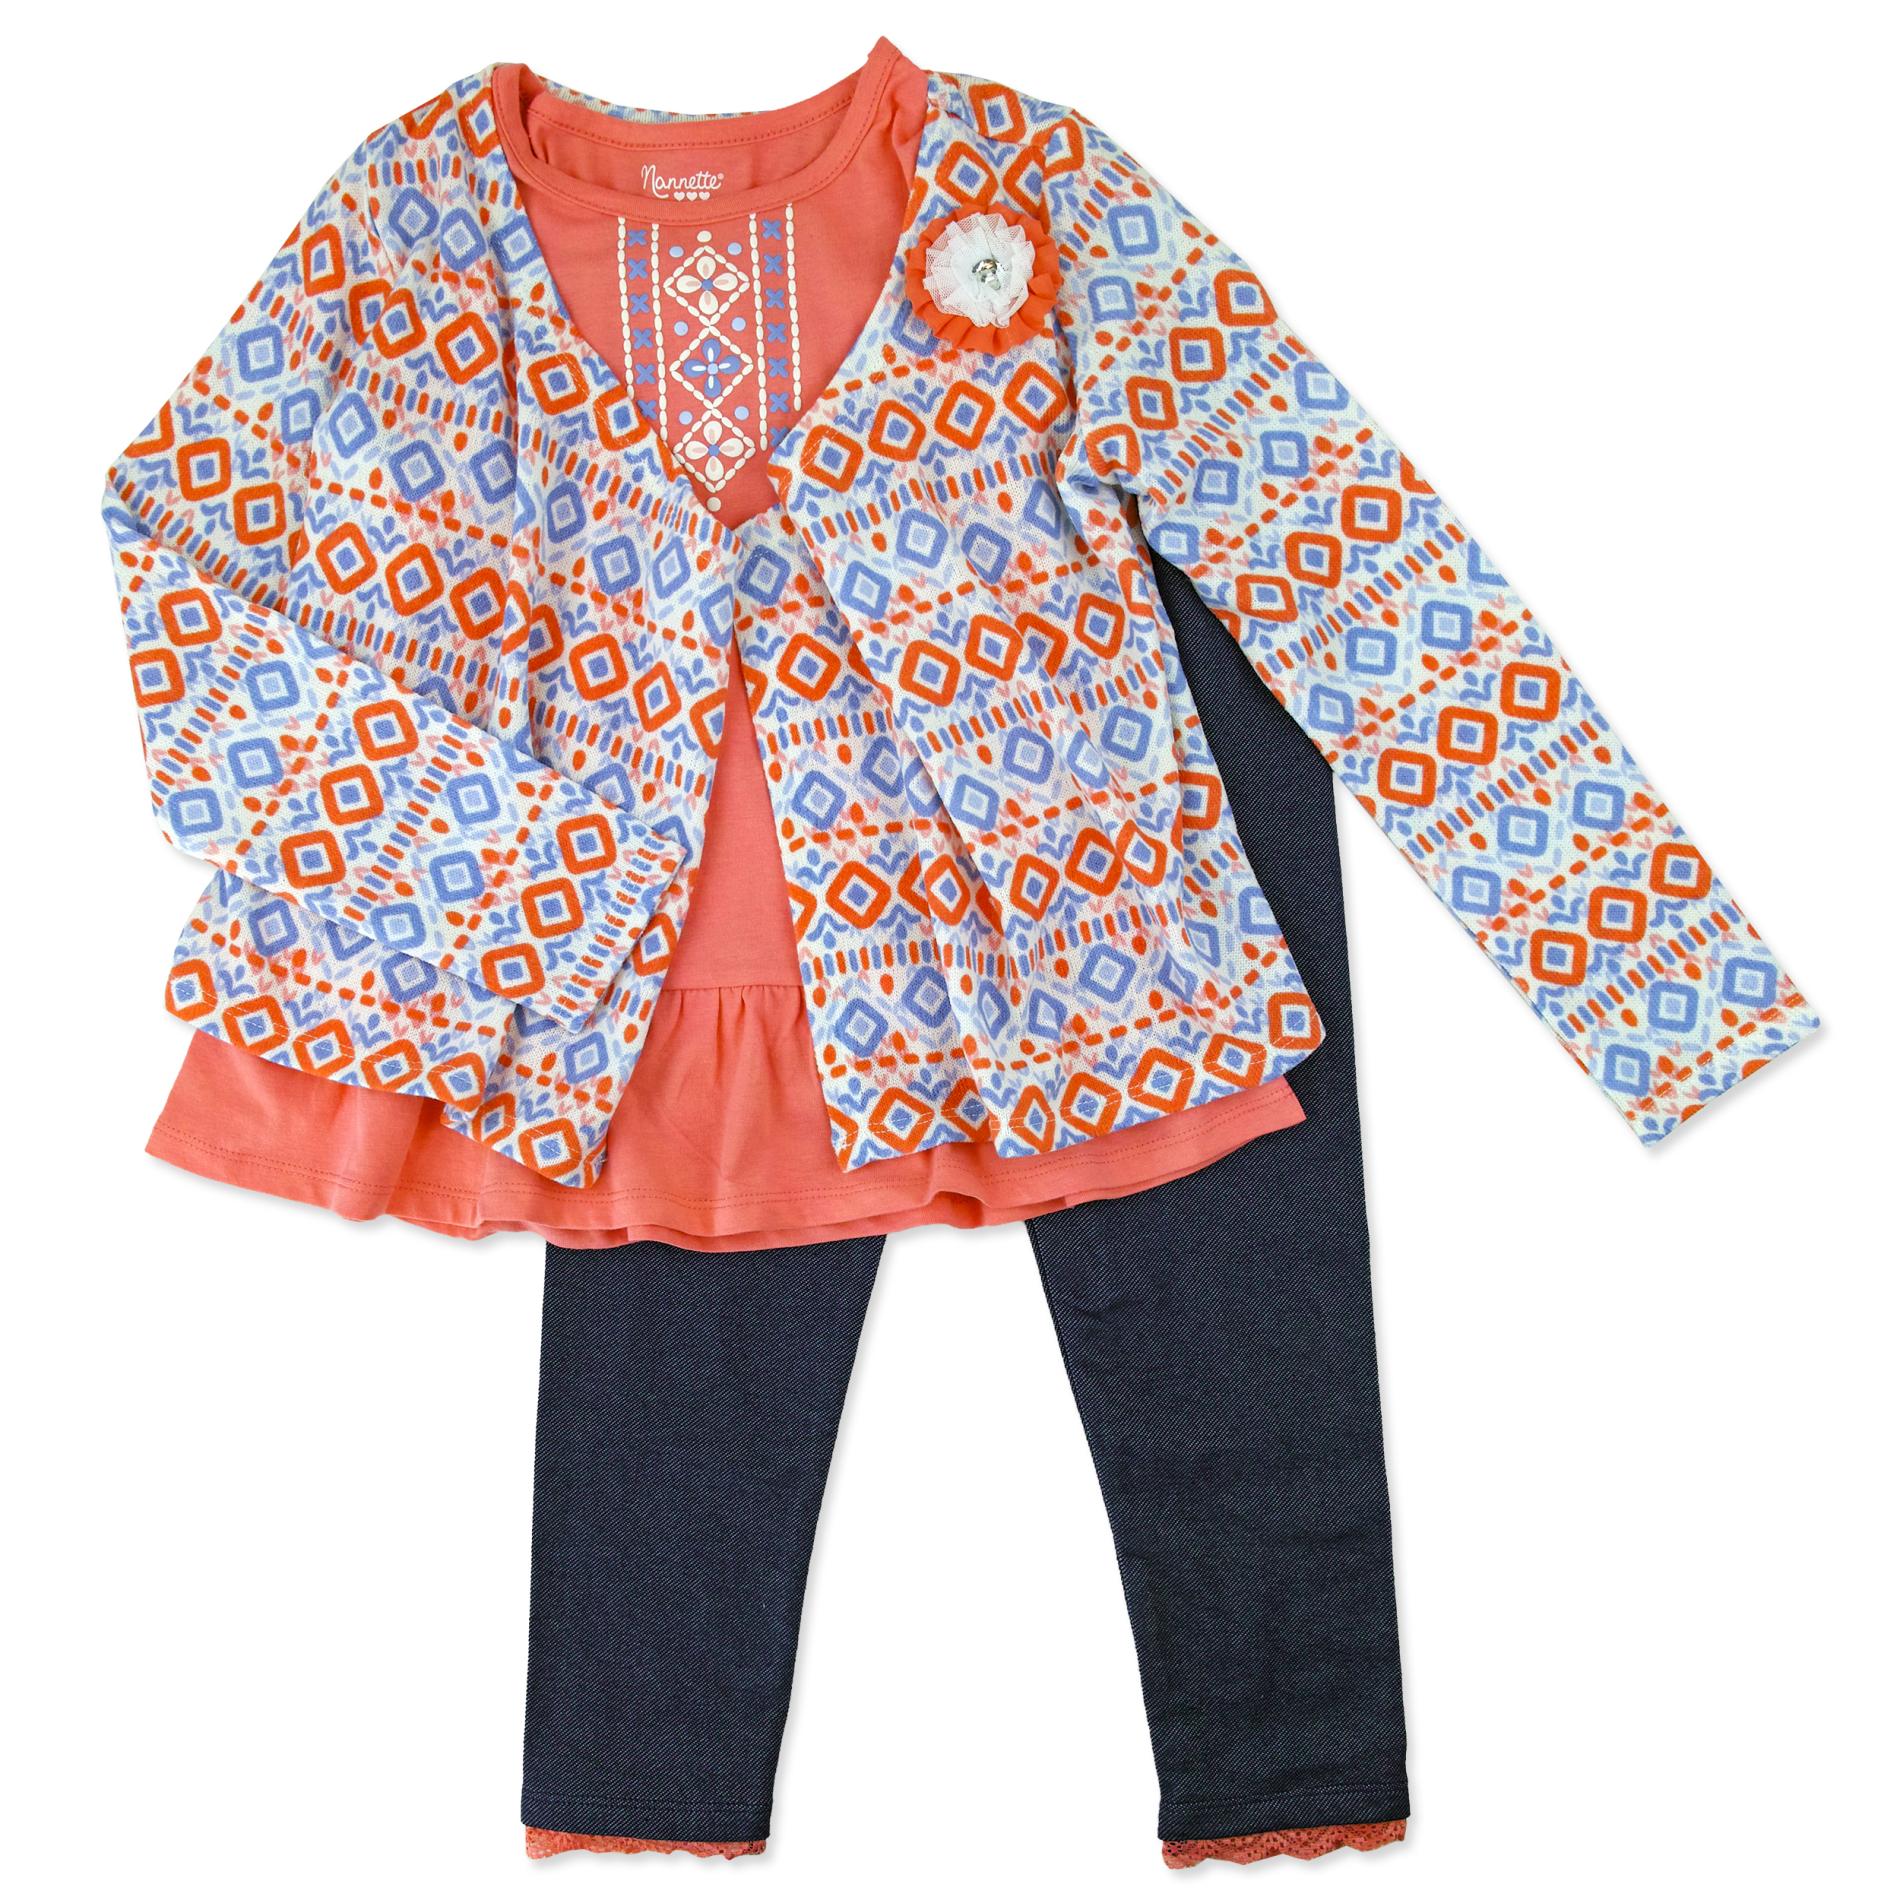 Young Hearts Infant & Toddler Girls' Layered-Look Top & Leggings - Tribal